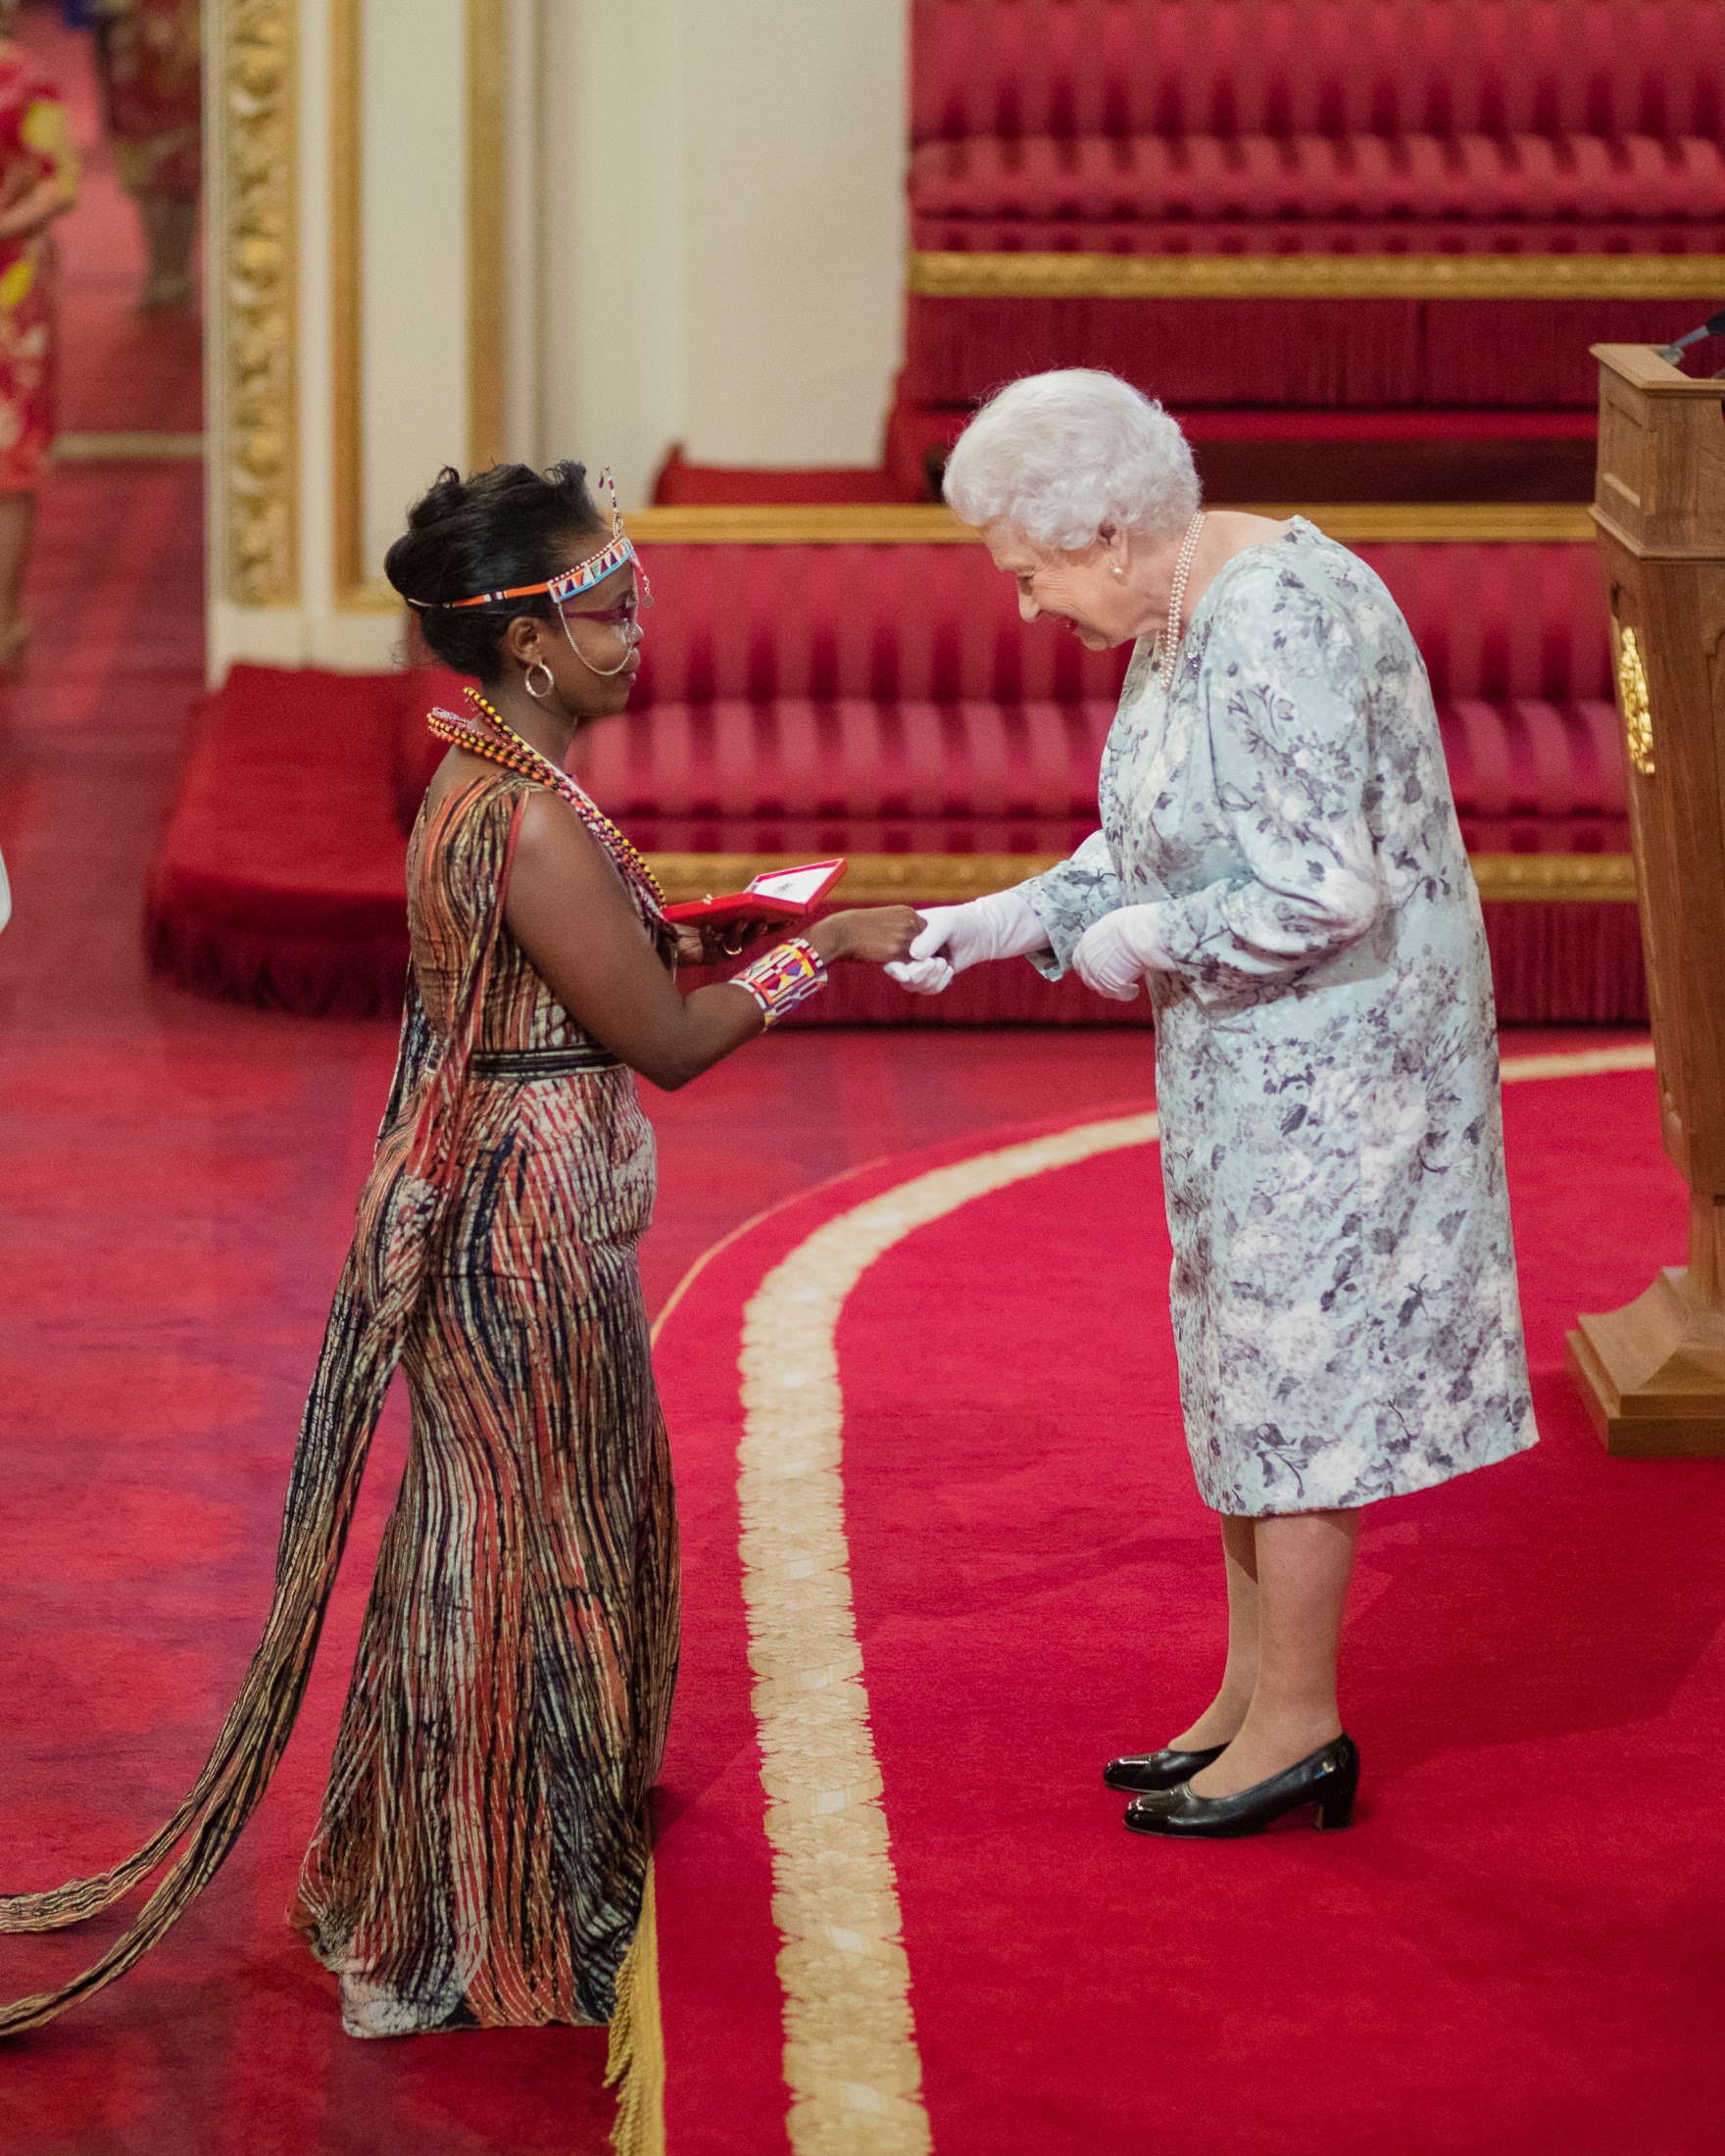 Chebet Lesan 2017 Queen's Young Leader from Kenya